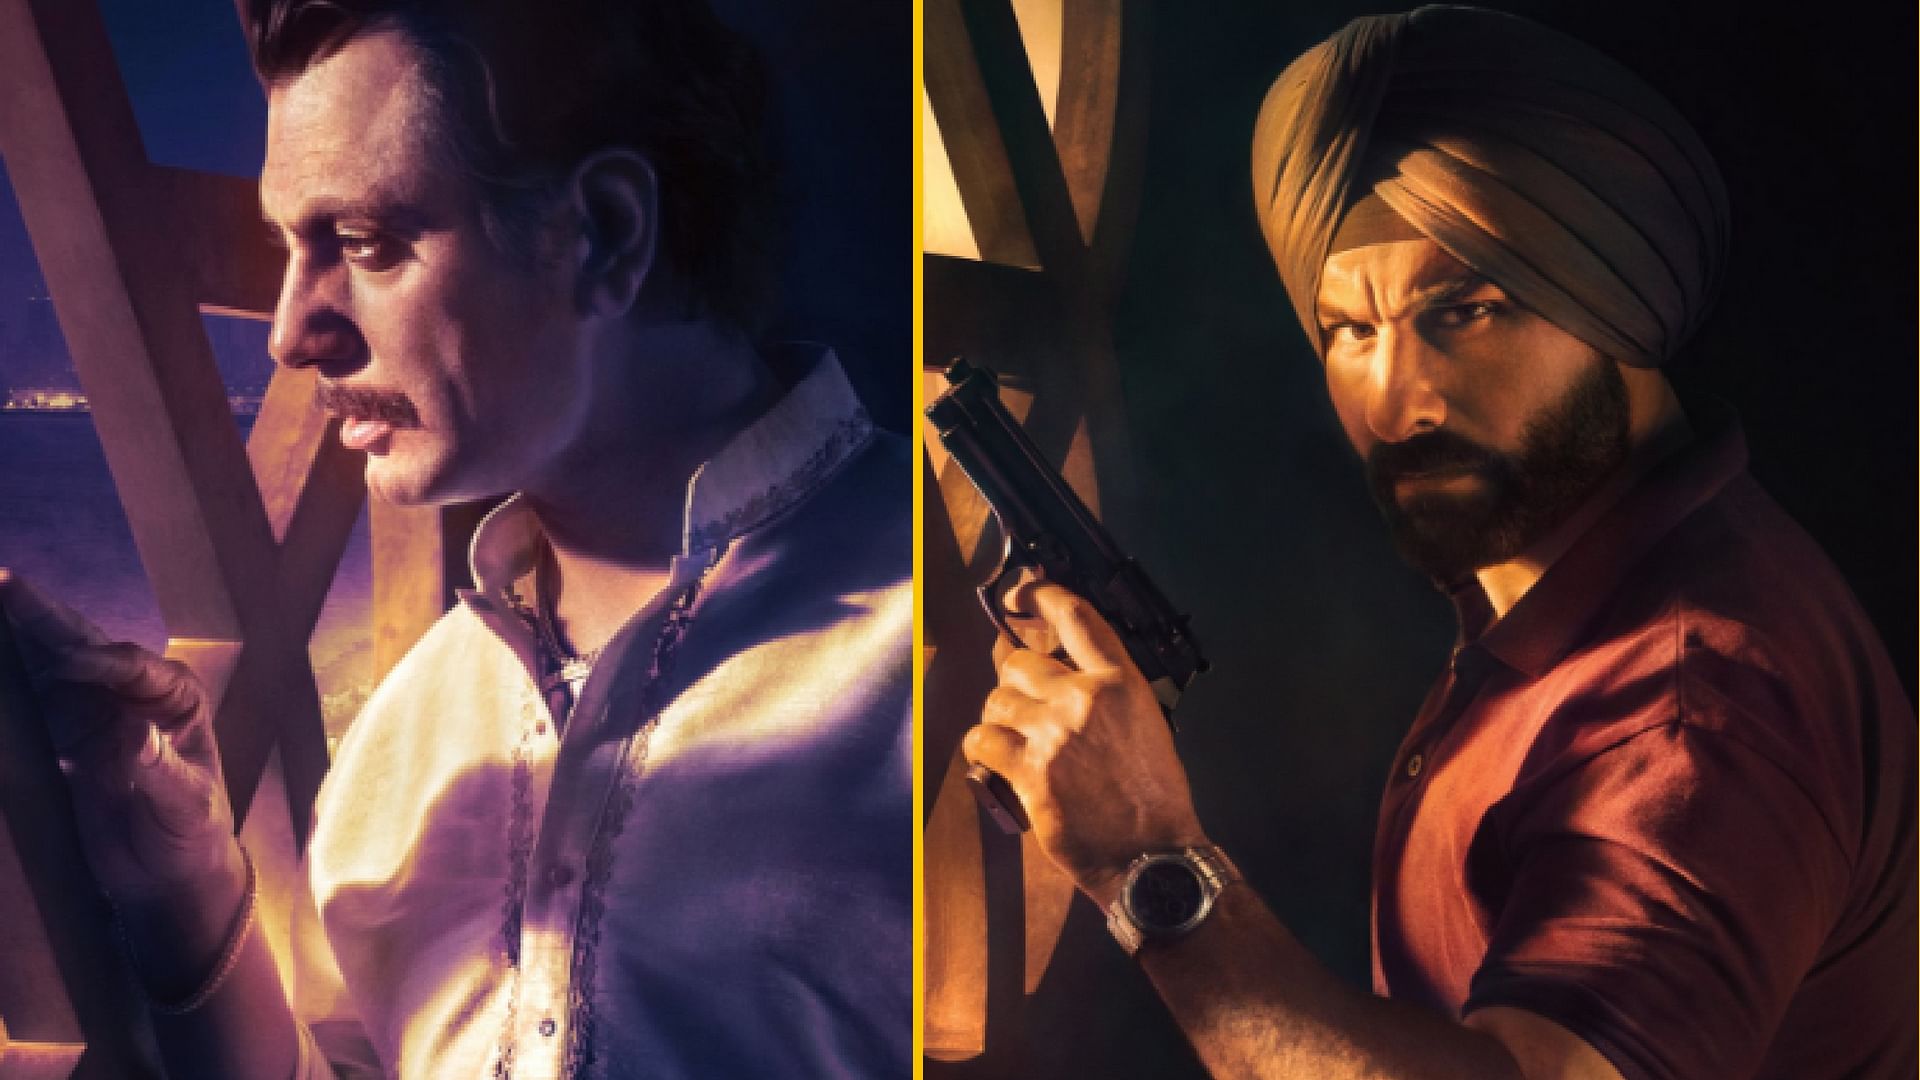 Sacred Games Wallpapers